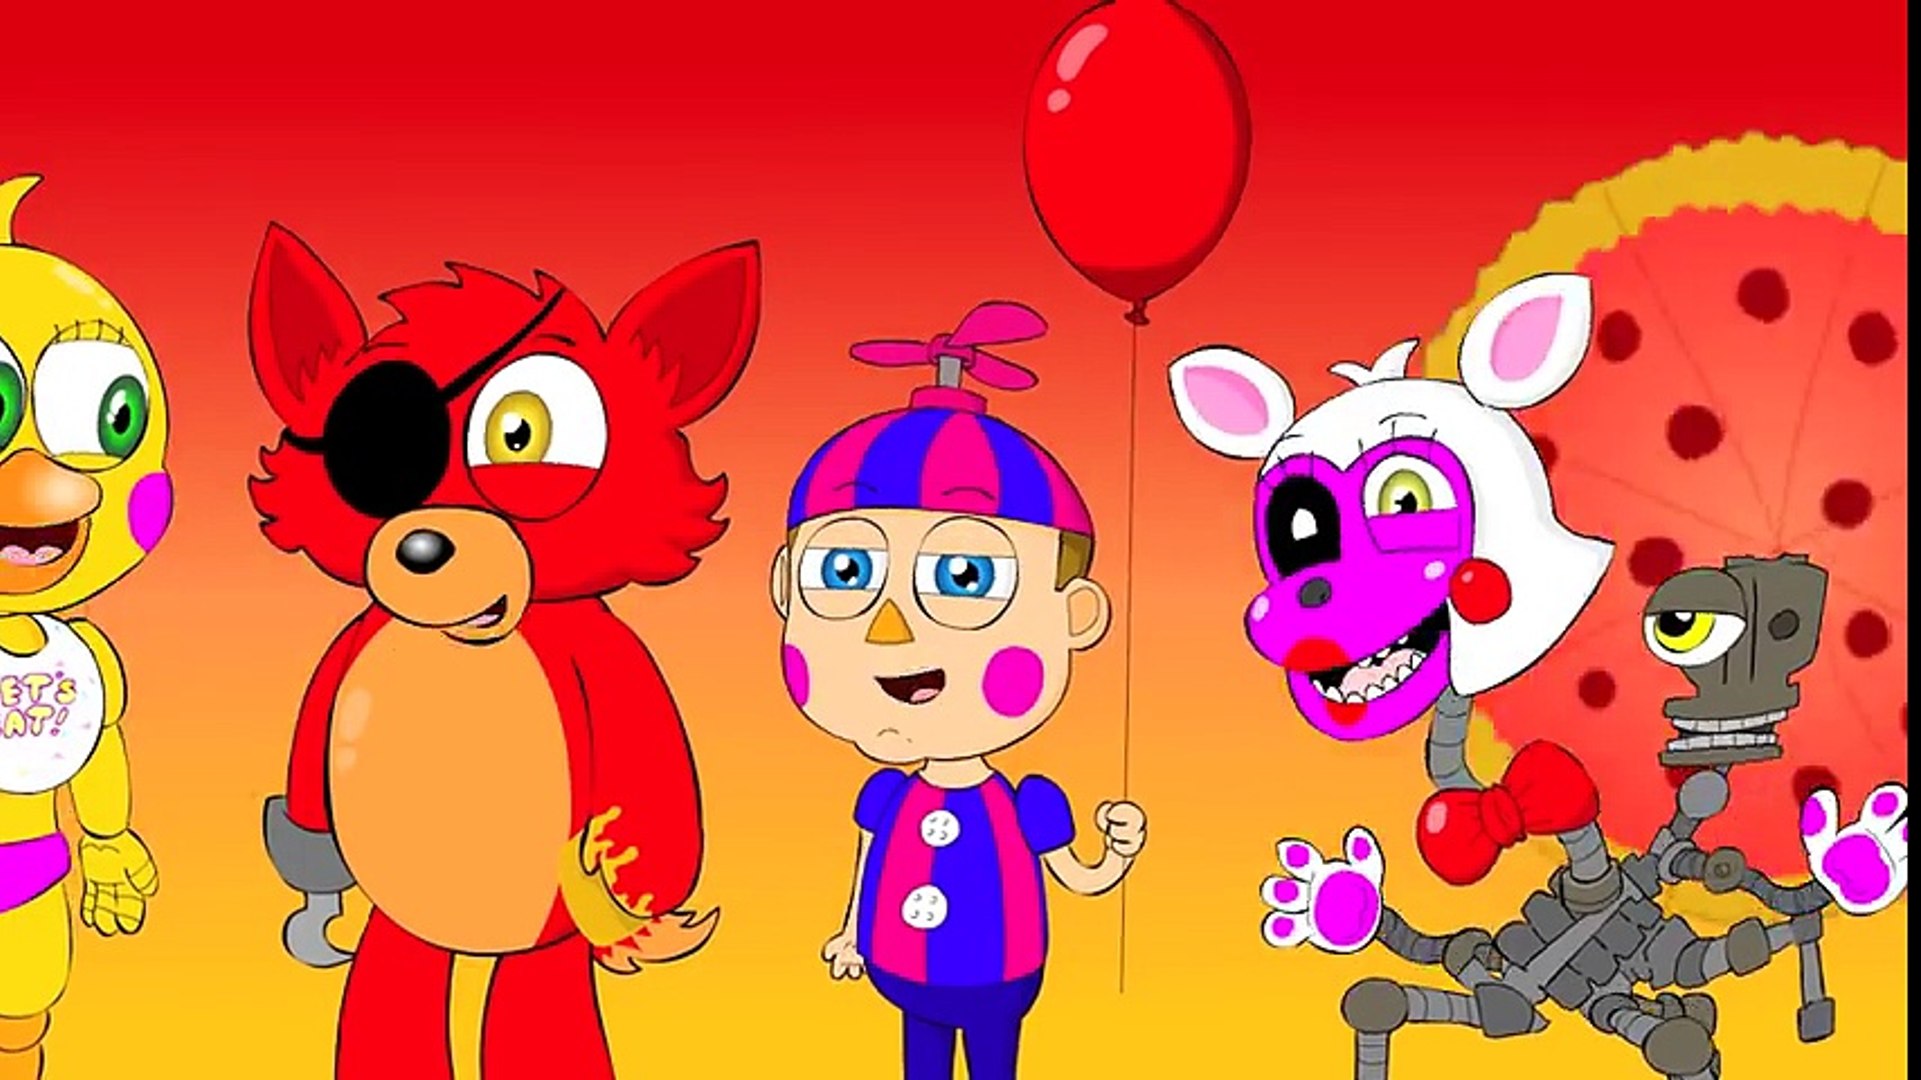 ♪ FIVE NIGHTS AT FREDDY'S WORLD THE MUSICAL - FNAF Animation Parody Song 